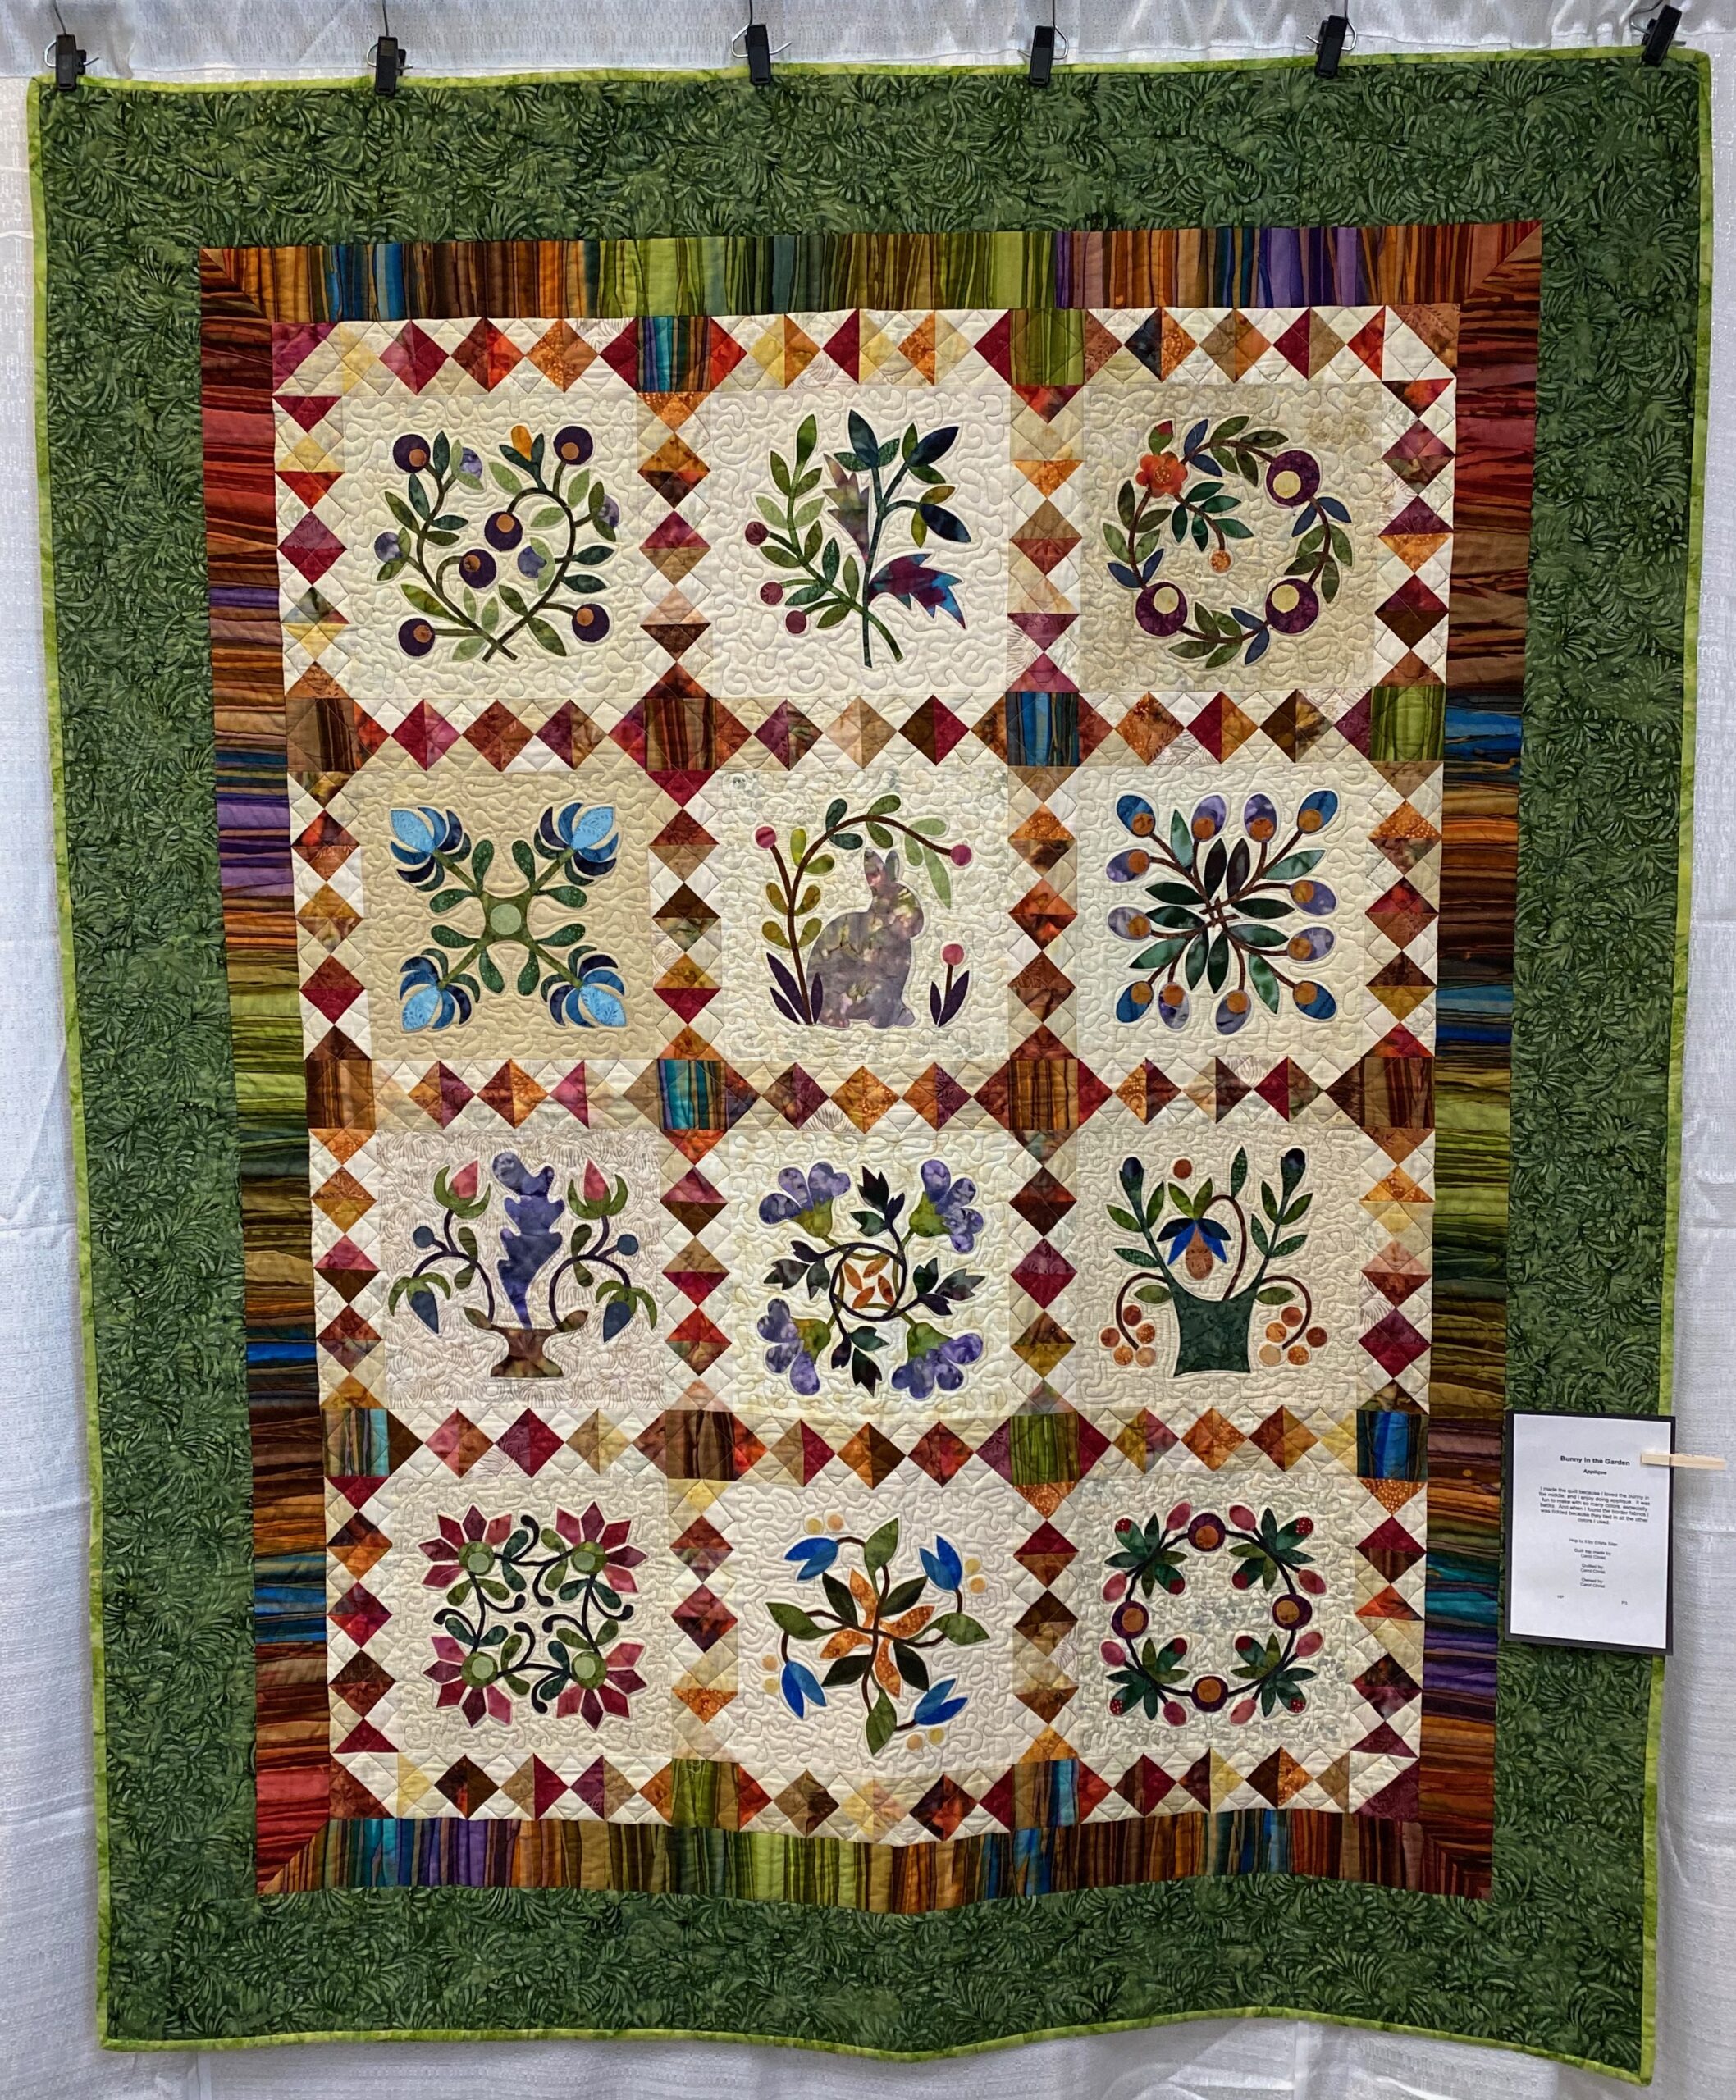 The 2023 MPS Earth Day Quilt Show - Carol C. - Bunny in the Garden